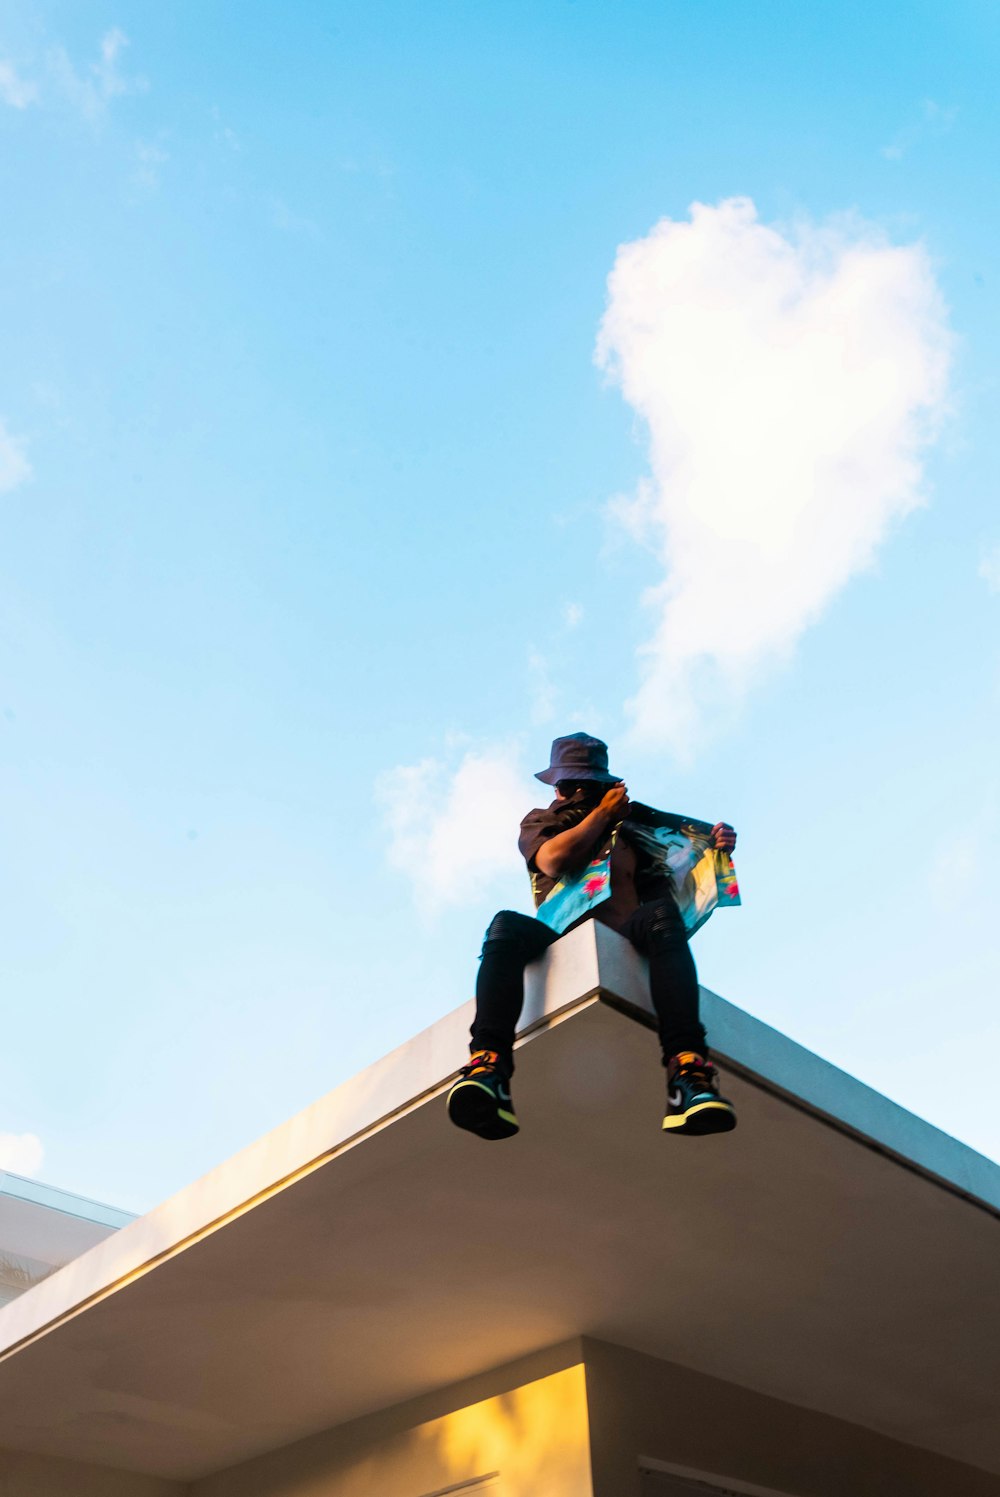 a man riding a skateboard up the side of a building